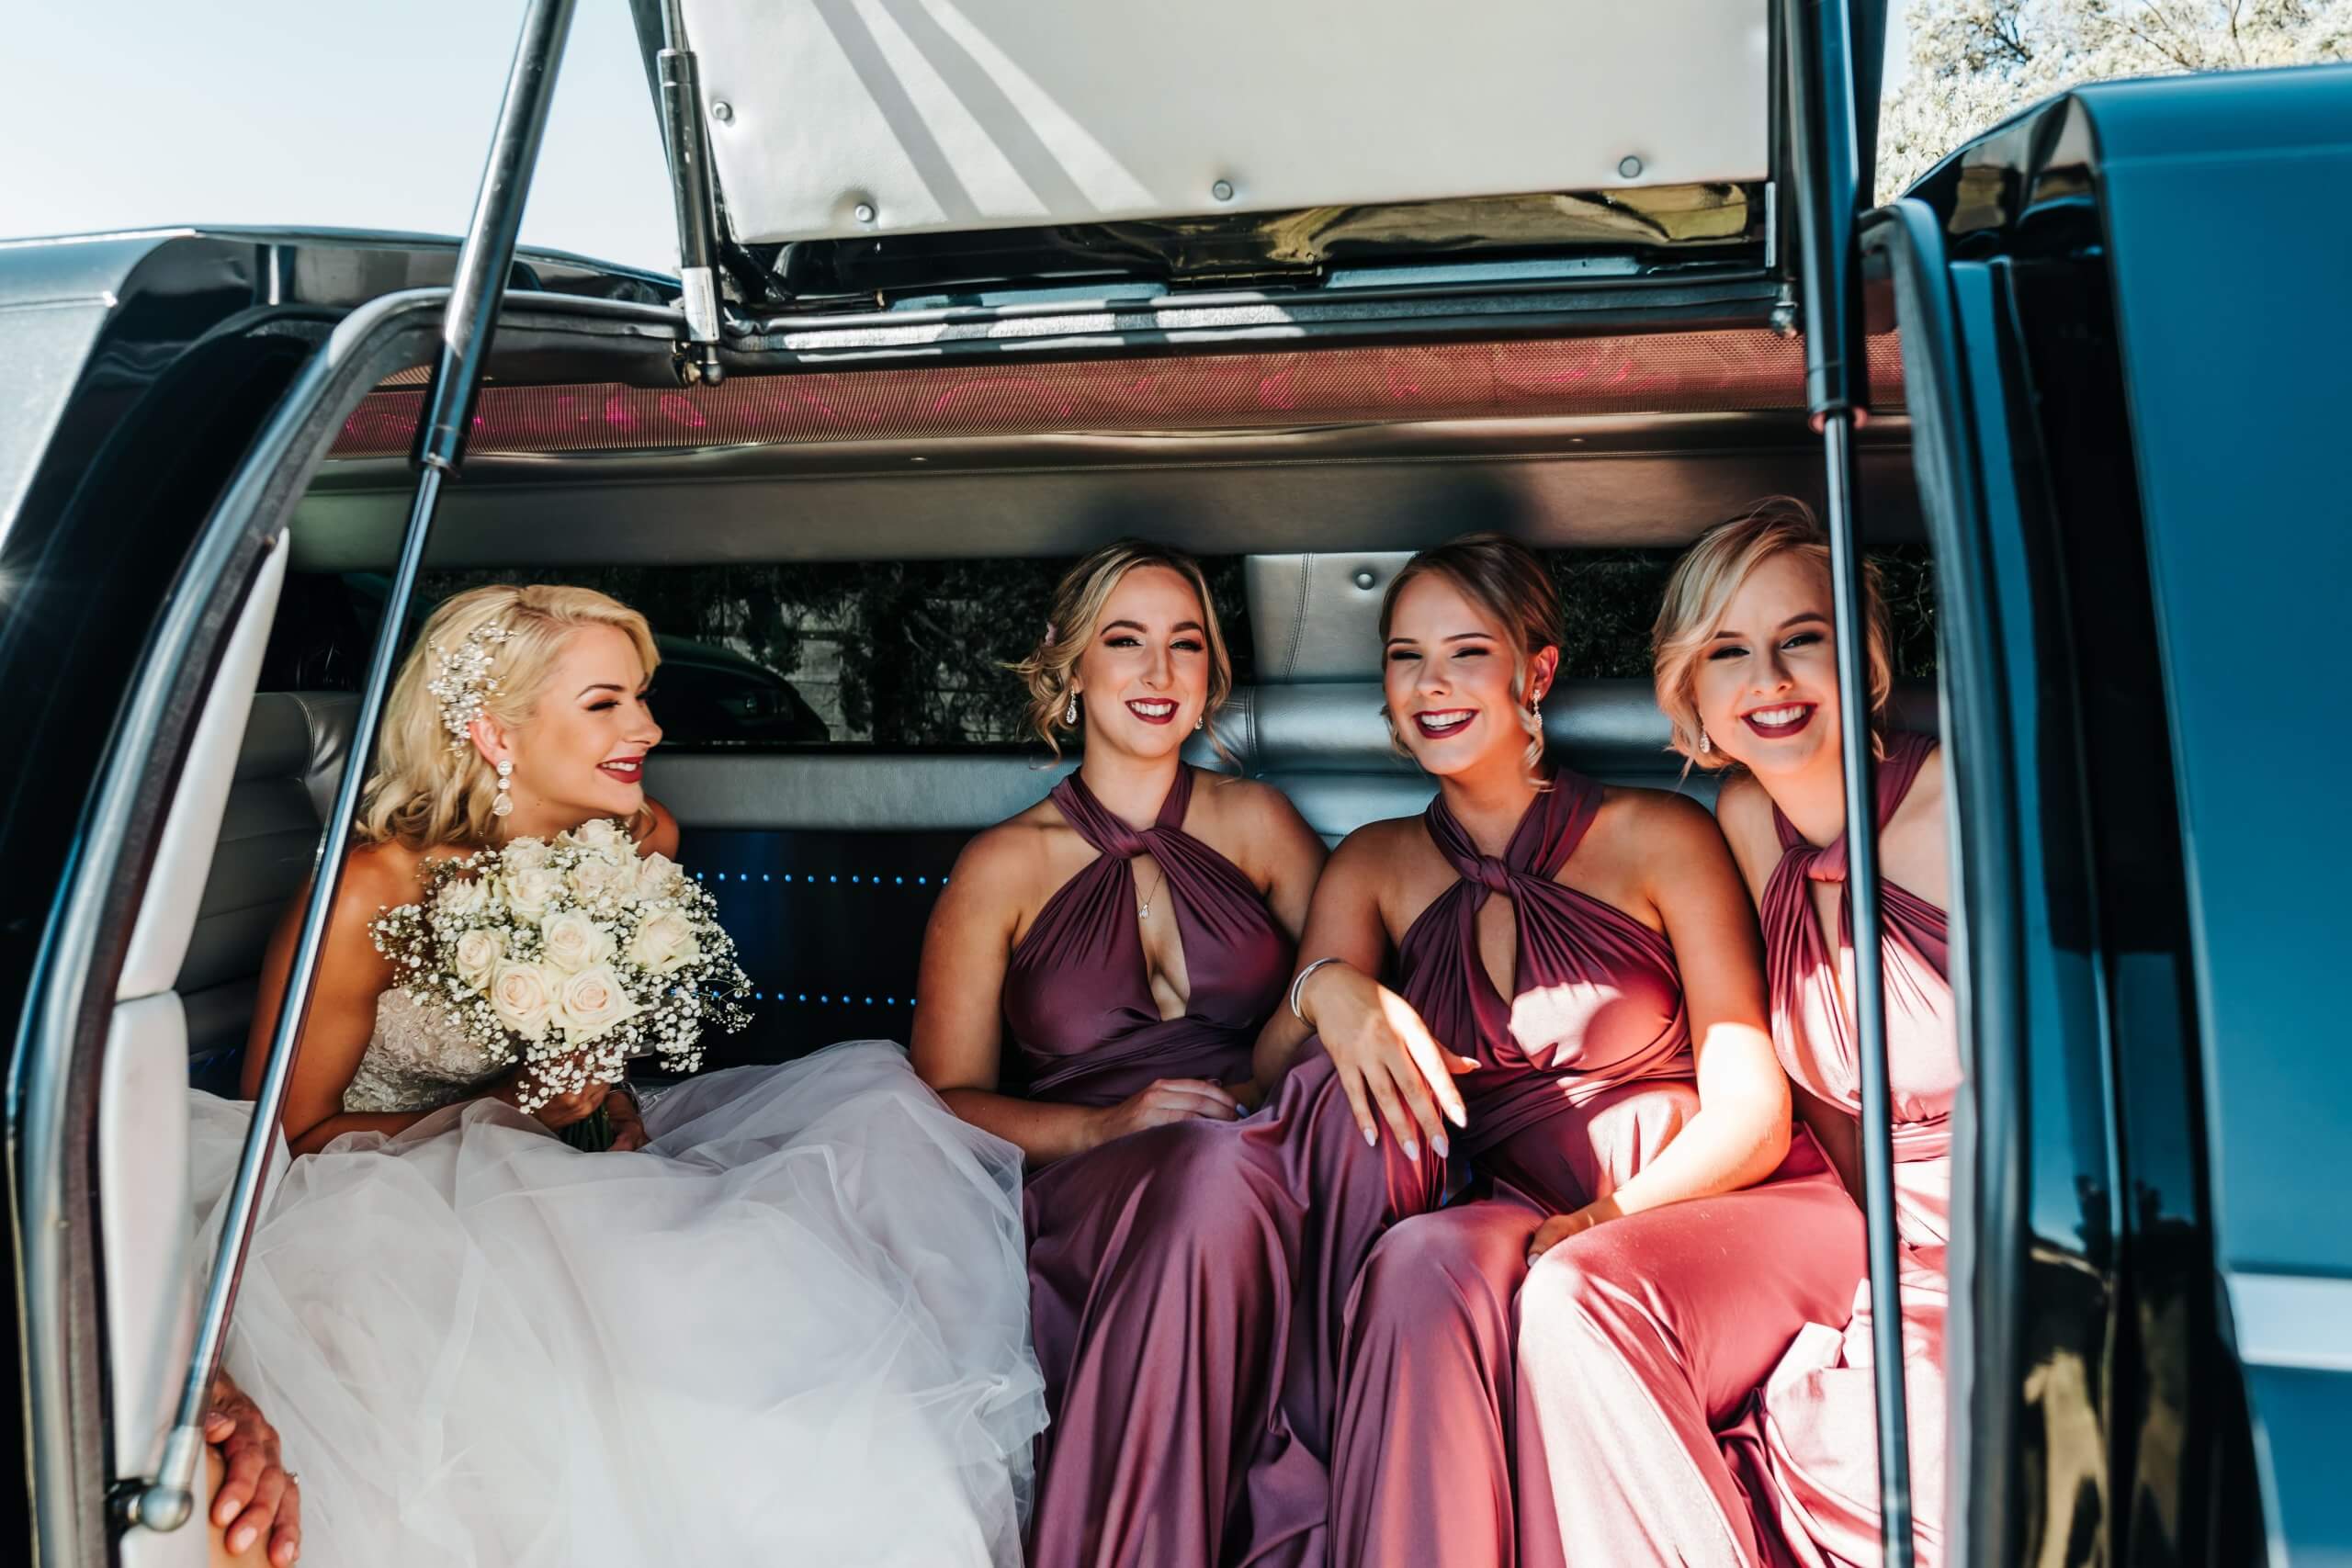 The beautiful bride and her bridesmaids sitting inside the limo, ready to head out to the ceremony venue.